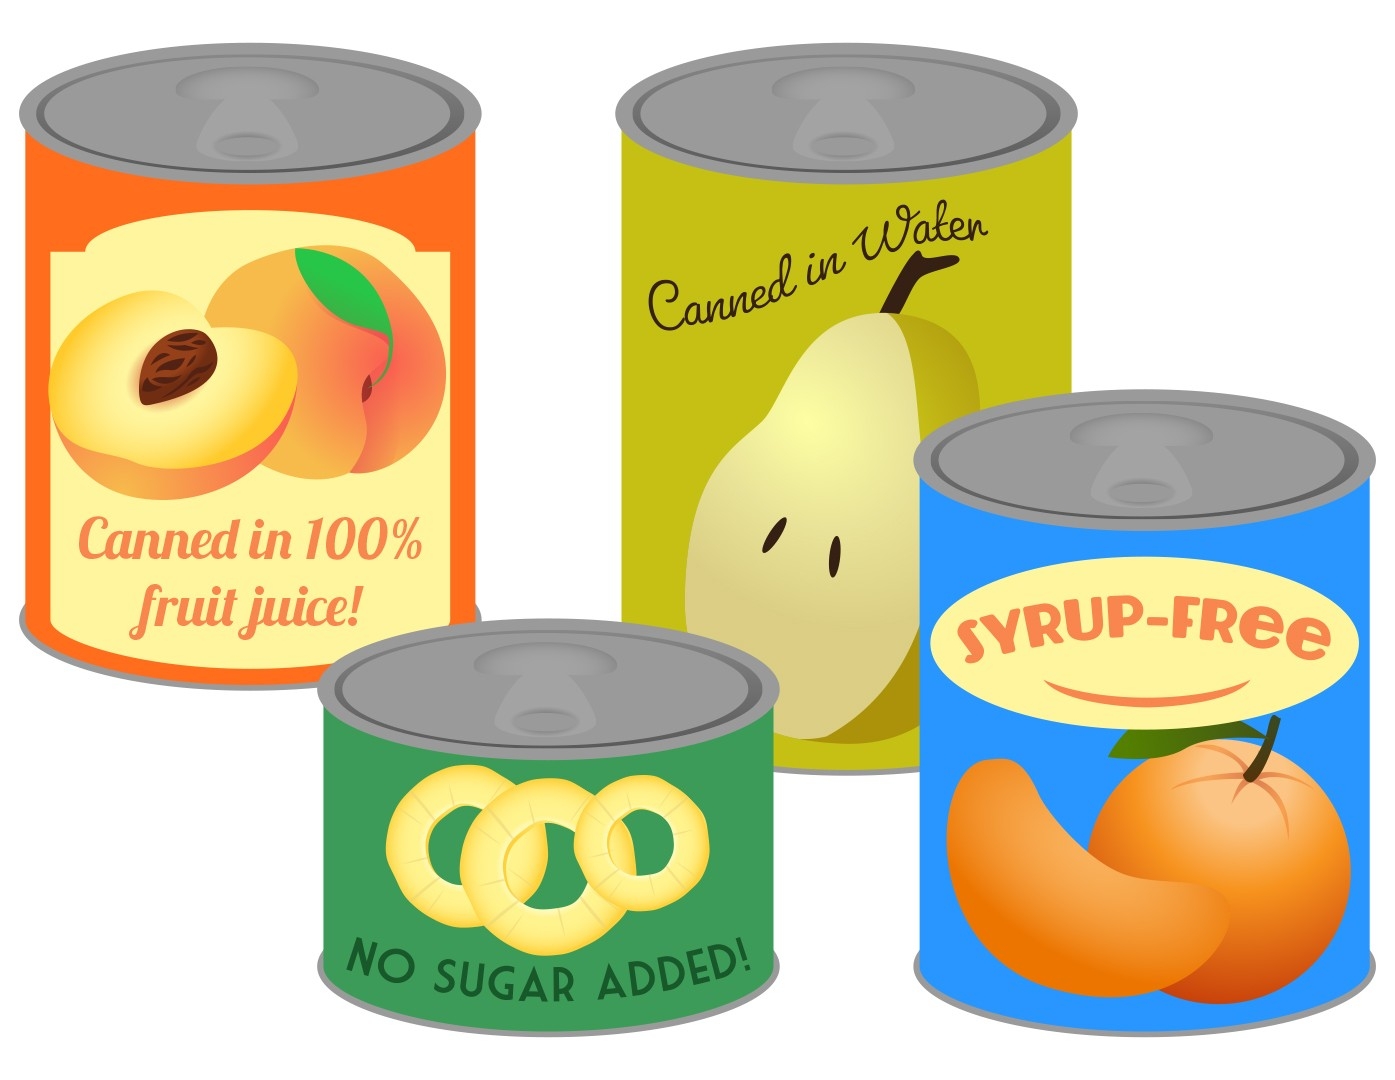 How to correctly understand the canned foods